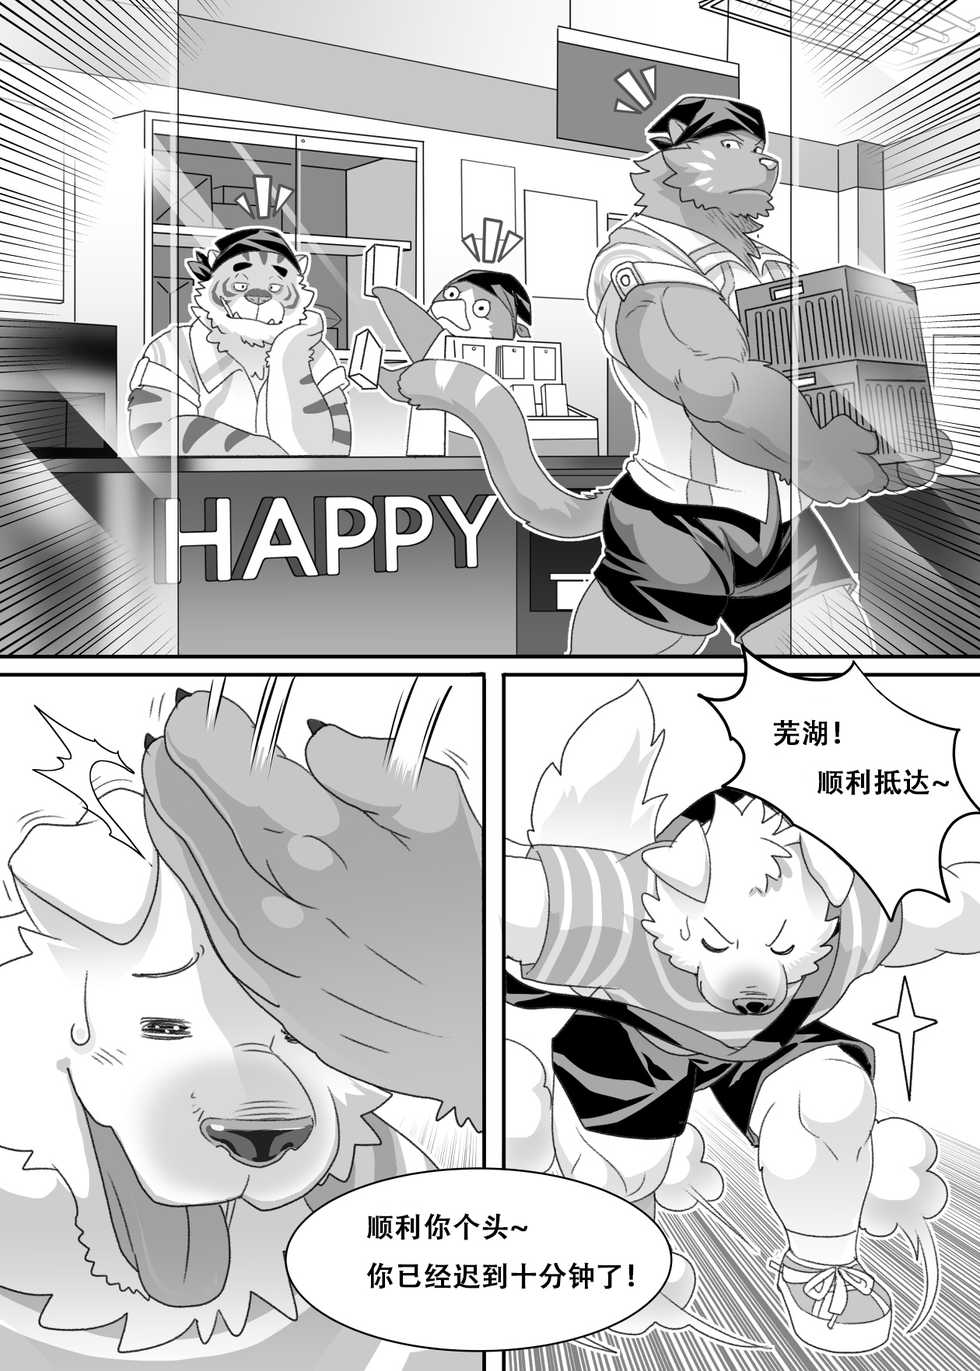 [KUMAHACHI] - "开心"便利店 ["Happy" Convenience Store] [Chinese] - Page 2